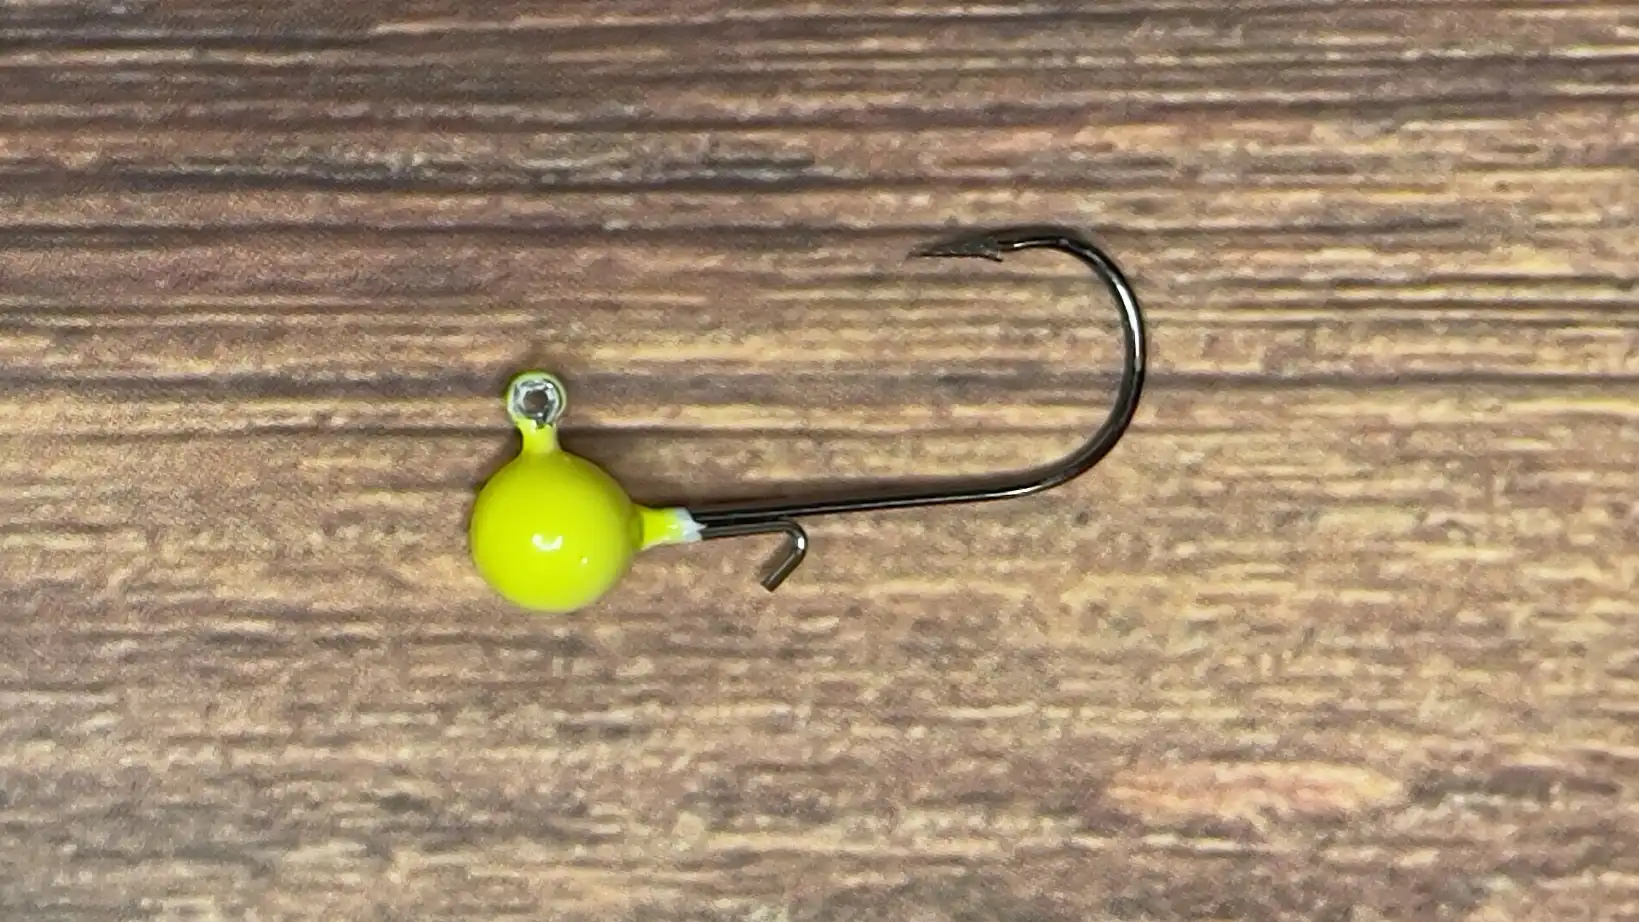 Micro Jig Heads Are The Deal…but Impossible To Find! 